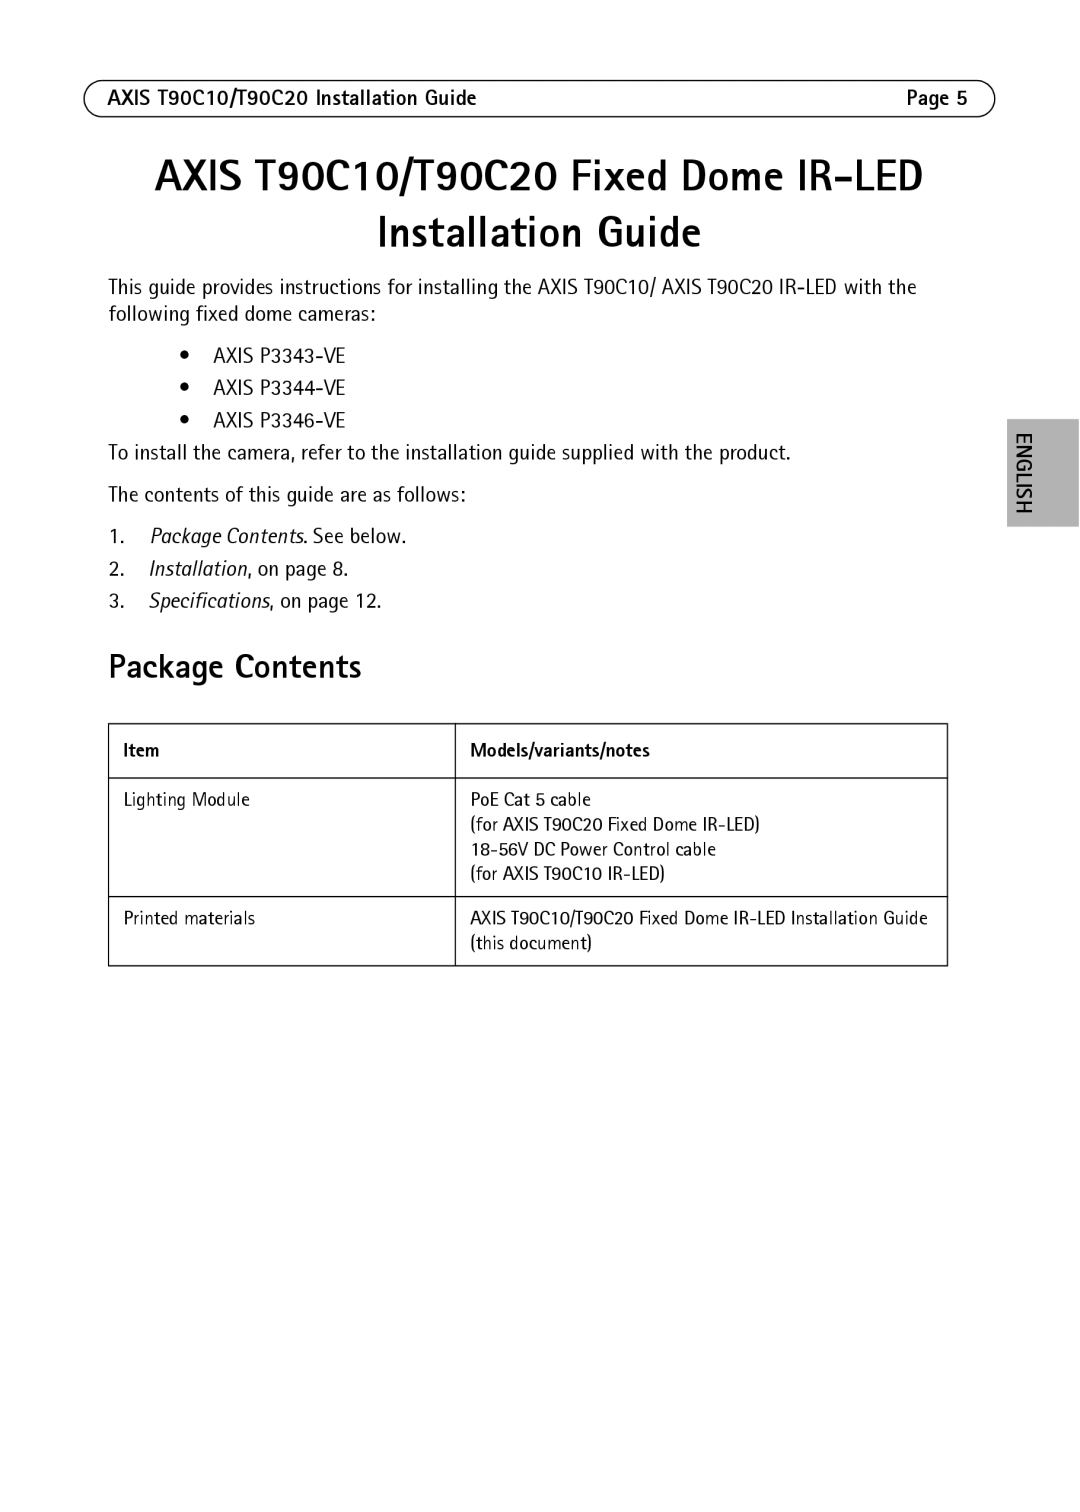 Axis Communications manual Installation Guide, AXIS T90C10/T90C20 Fixed Dome IR-LED, Package Contents, English 